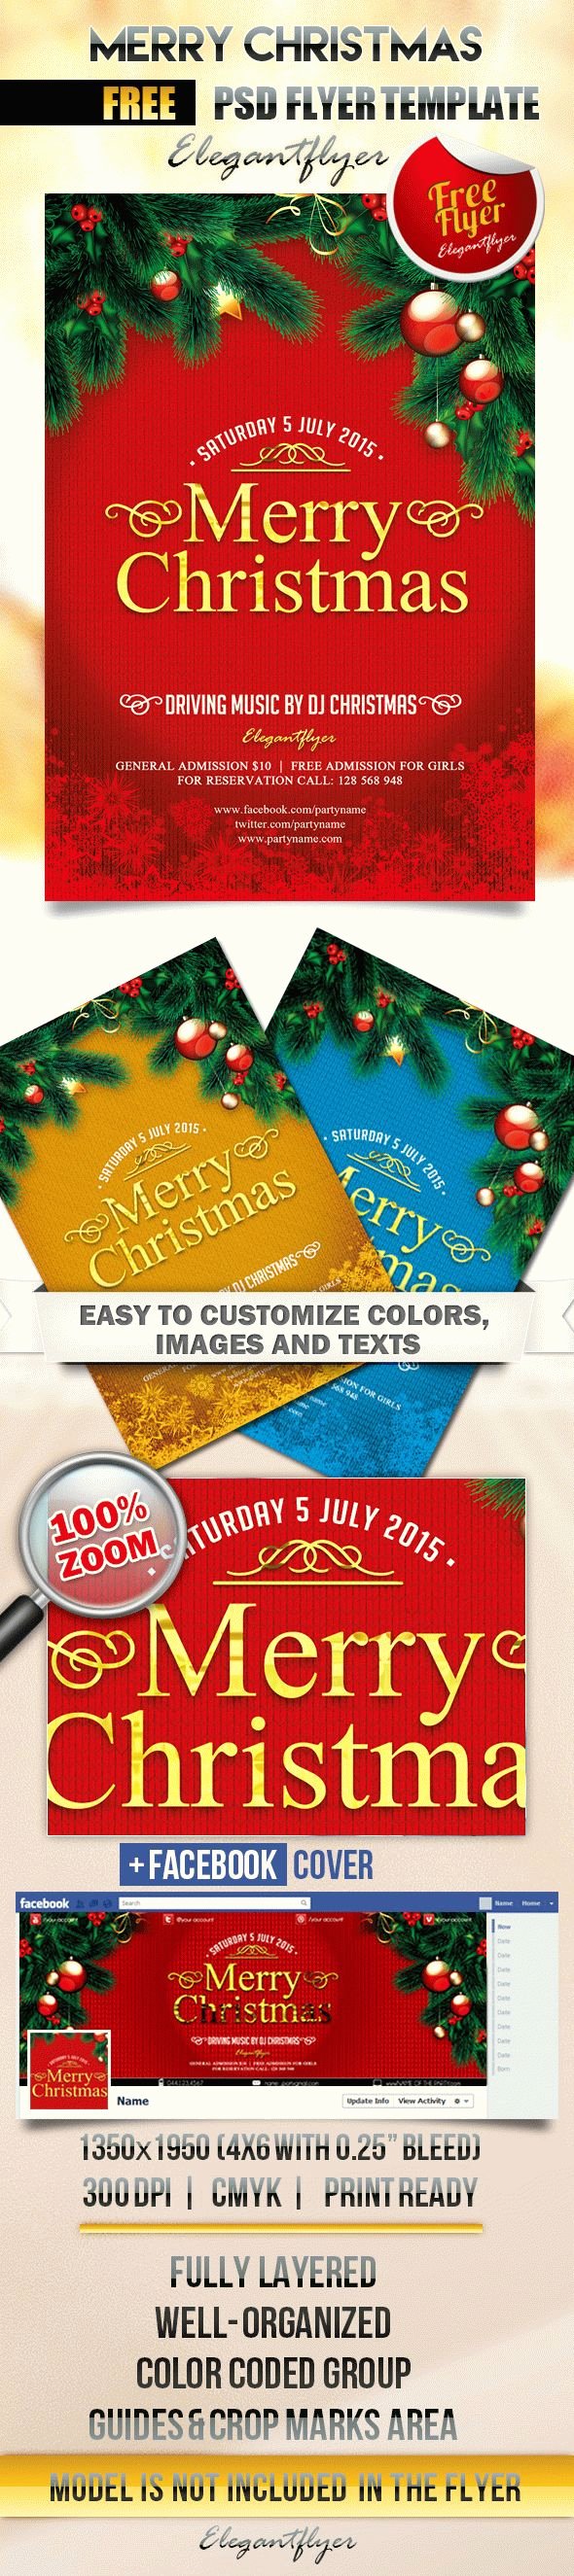 Free Christmas Flyer Templates New Free Printable Christmas Tree Template – by Elegantflyer